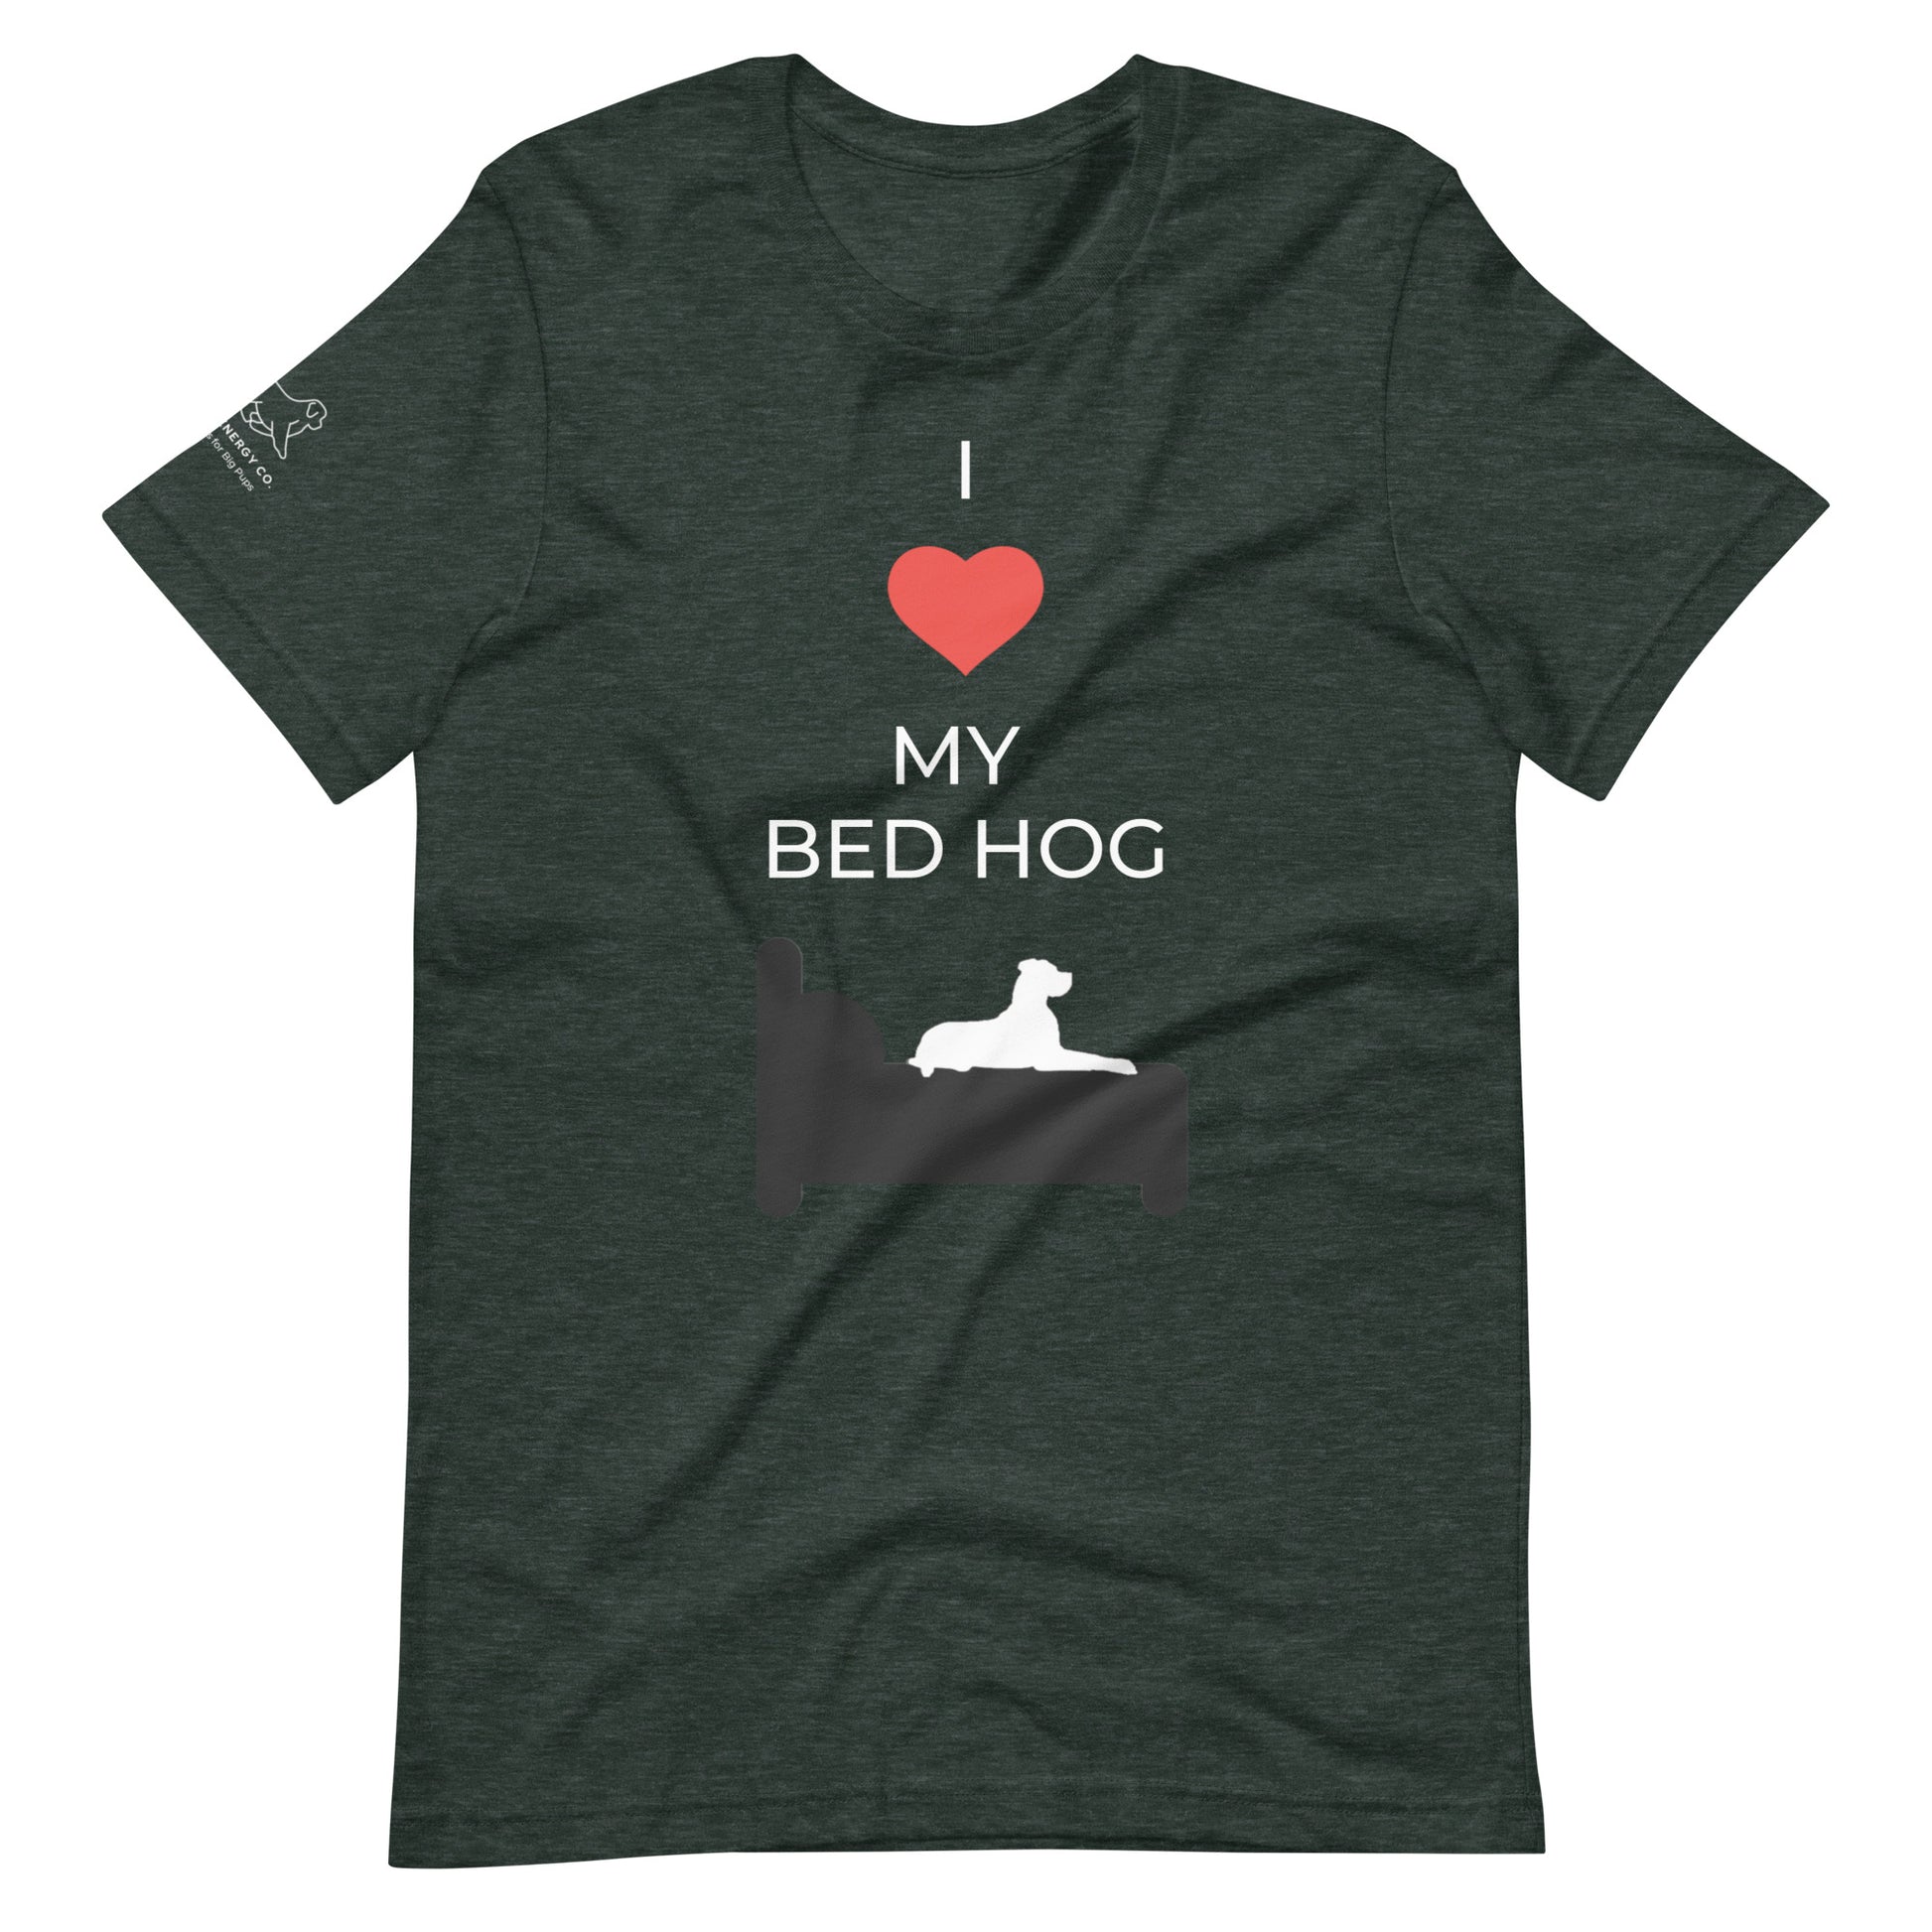 Front of a heather forest green t-shirt that reads "I love my bed hog" in white text over an illustration that is the white silhouette of a large dog laying on the deep gray silhouette of a bed. The word "love" is replaced by a red heart symbol.